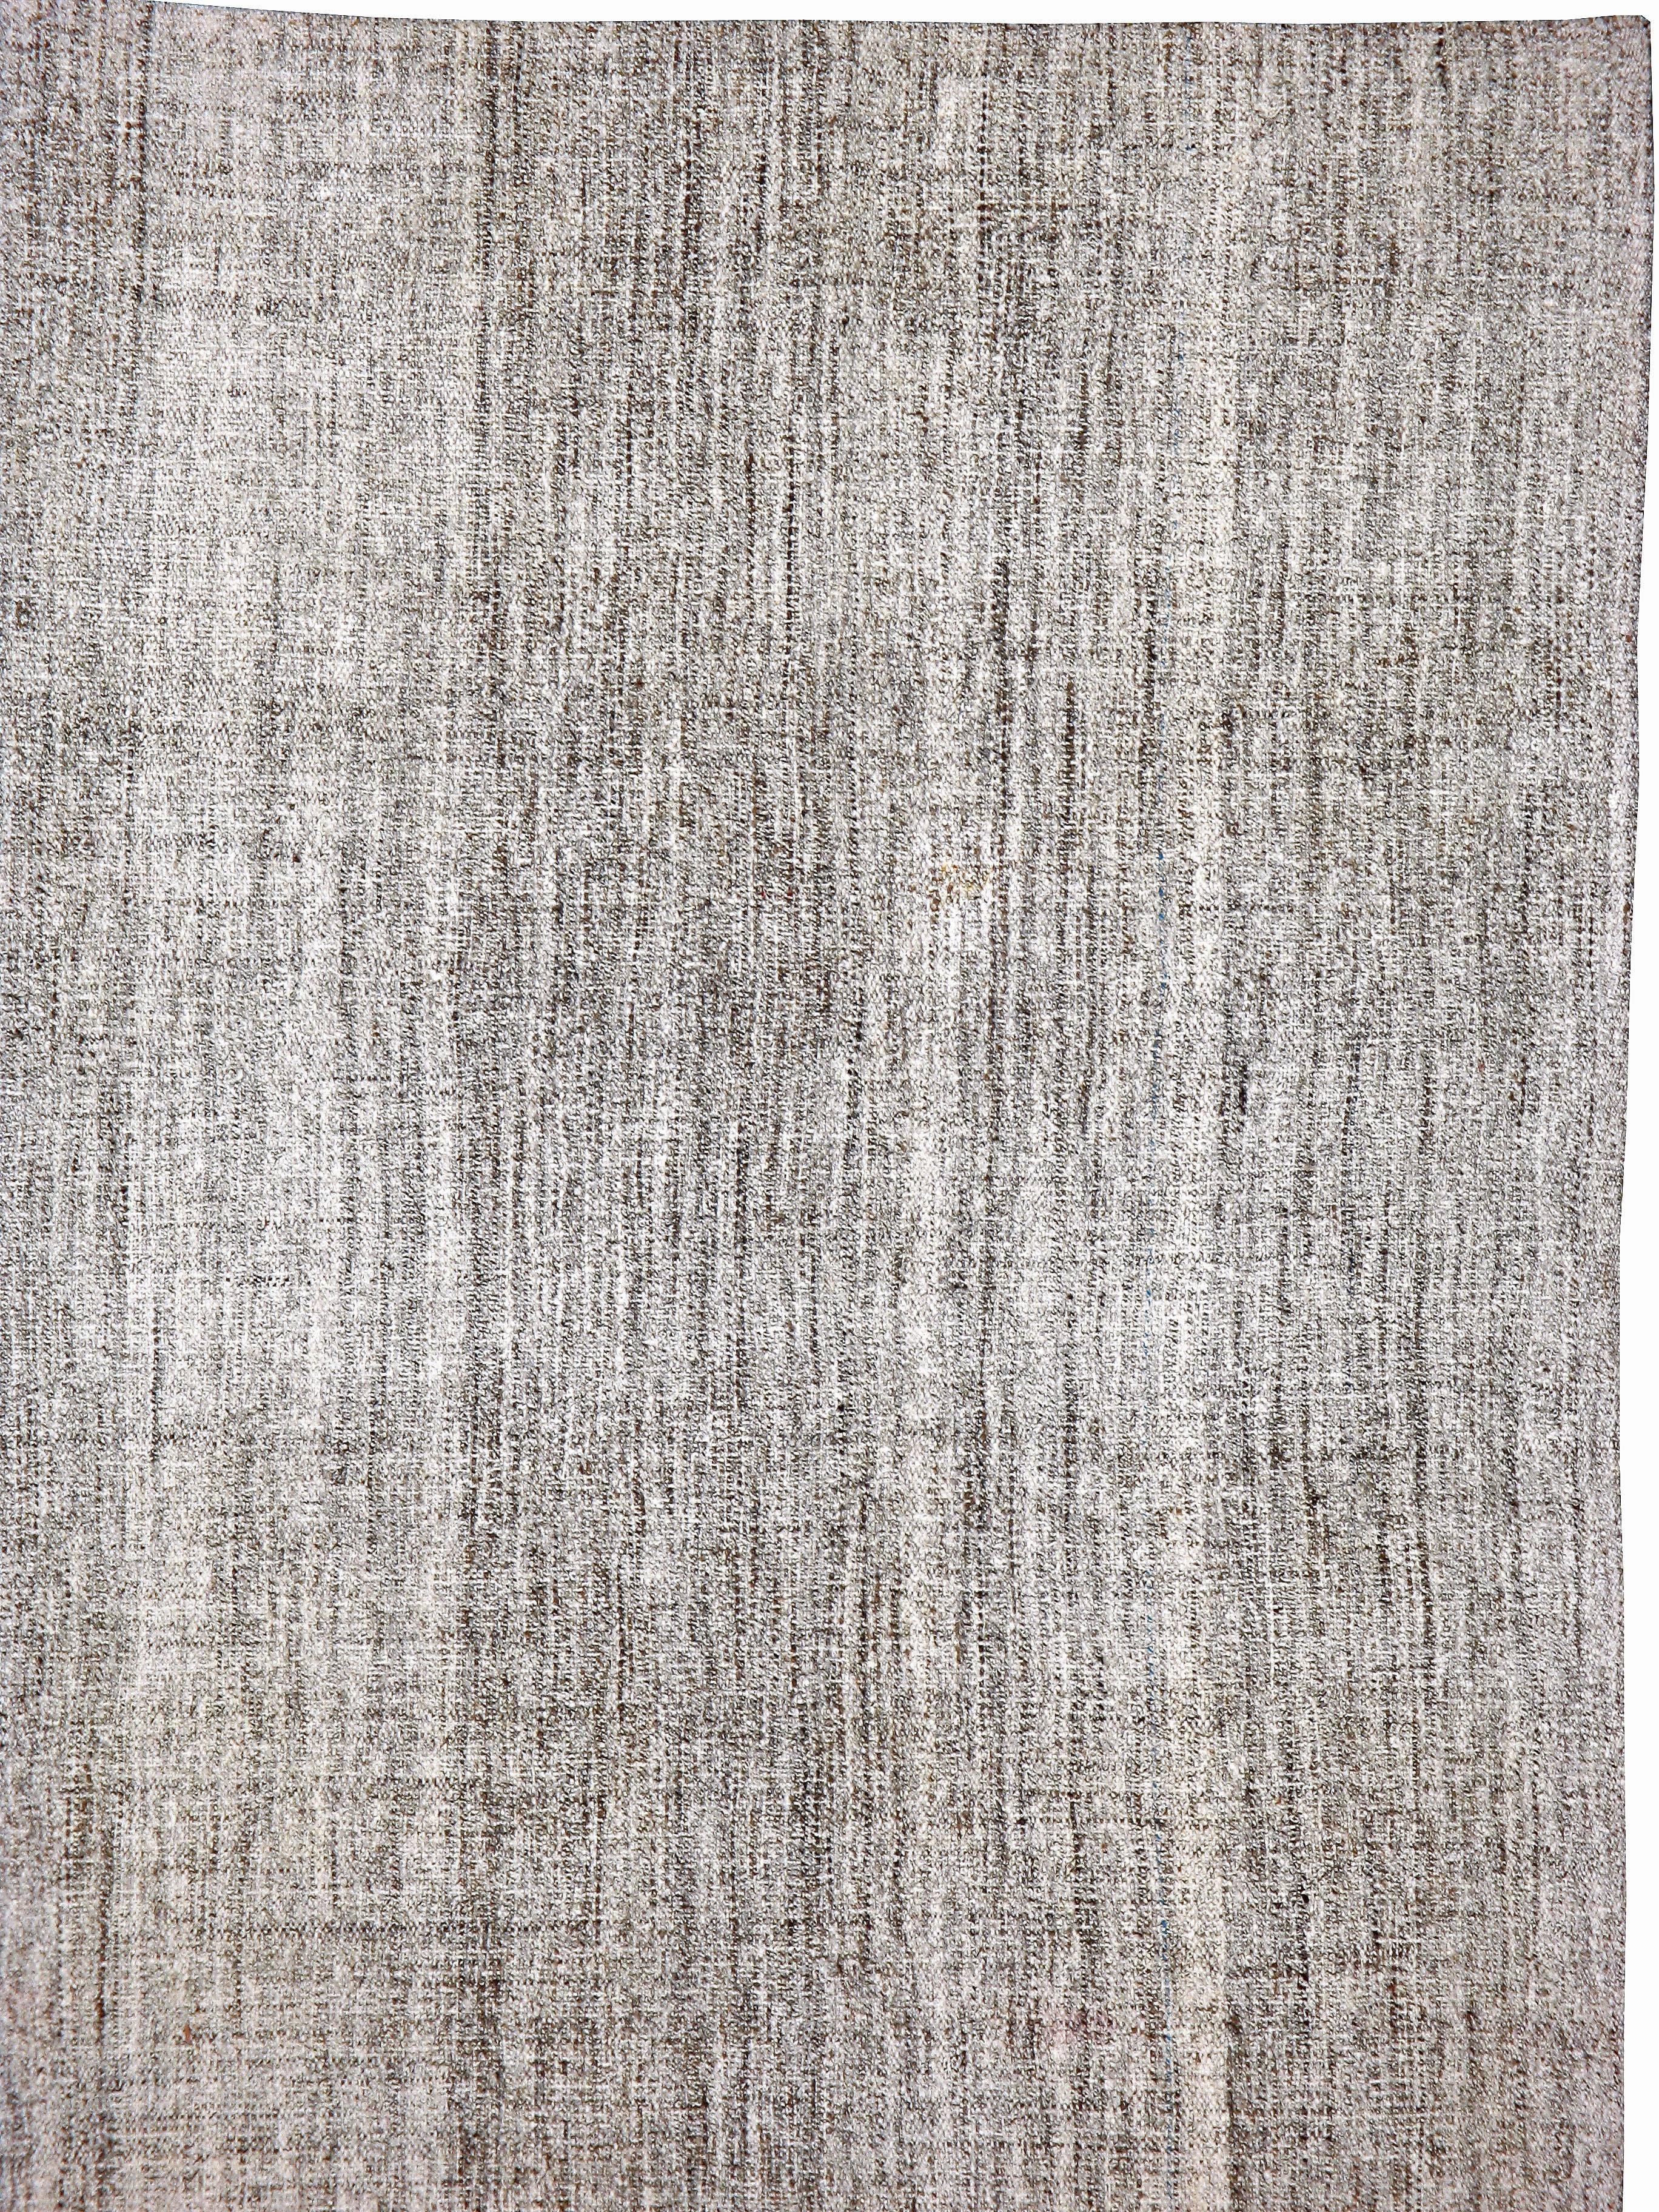 A vintage Turkish flat-woven Kilim carpet from the mid-20th century. All natural undyed wool, featuring a beautiful salt and pepper pattern.